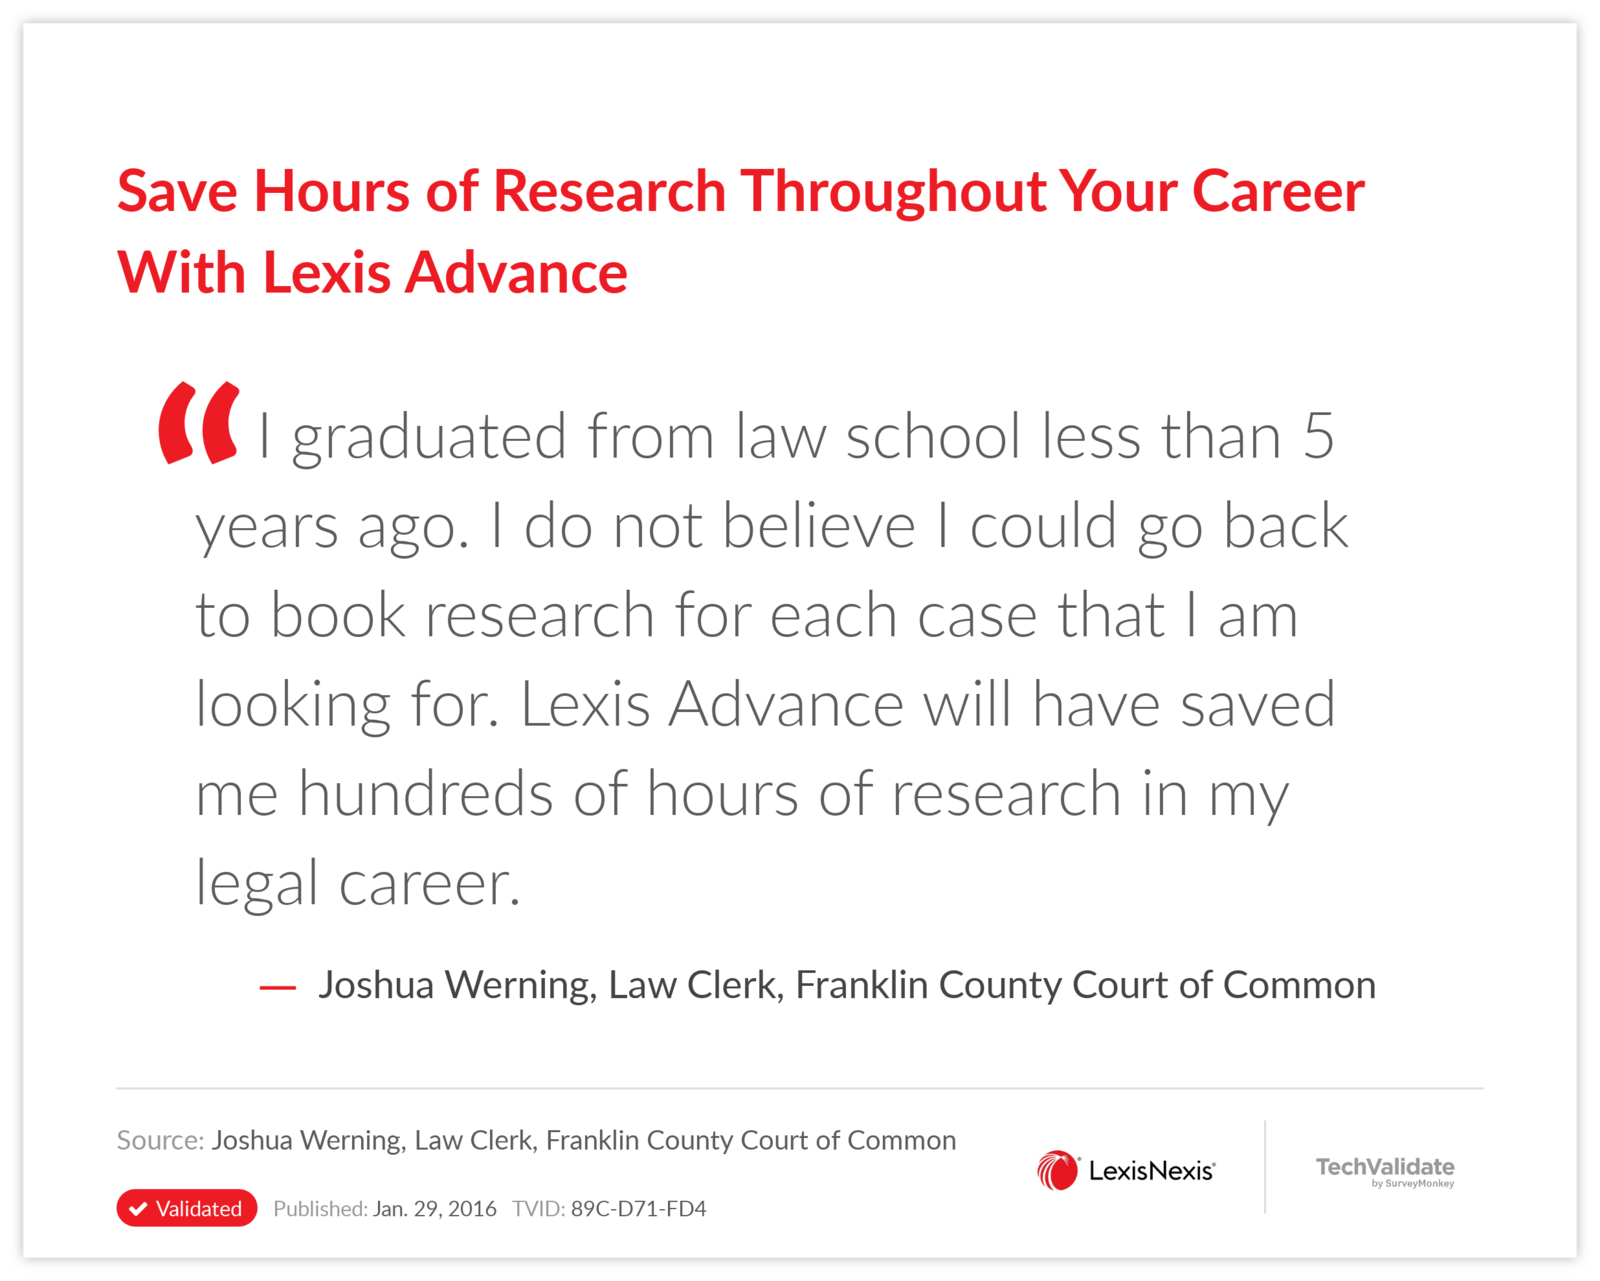 Save Hours of Research Throughout Your Career With Lexis Advance